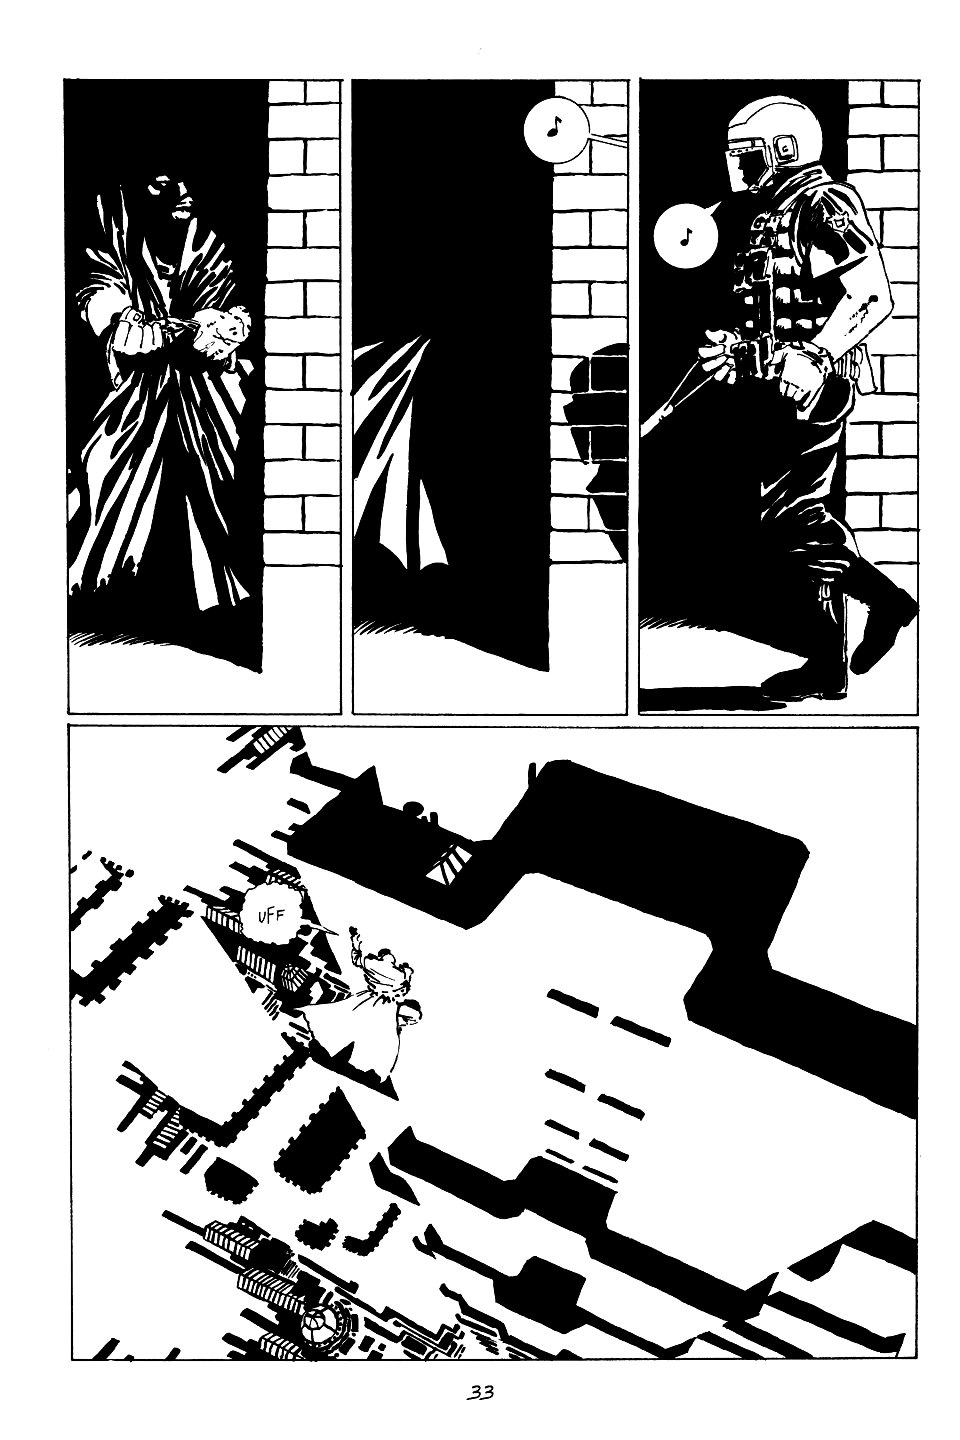 page 33 of sin city 1 the hard goodbye